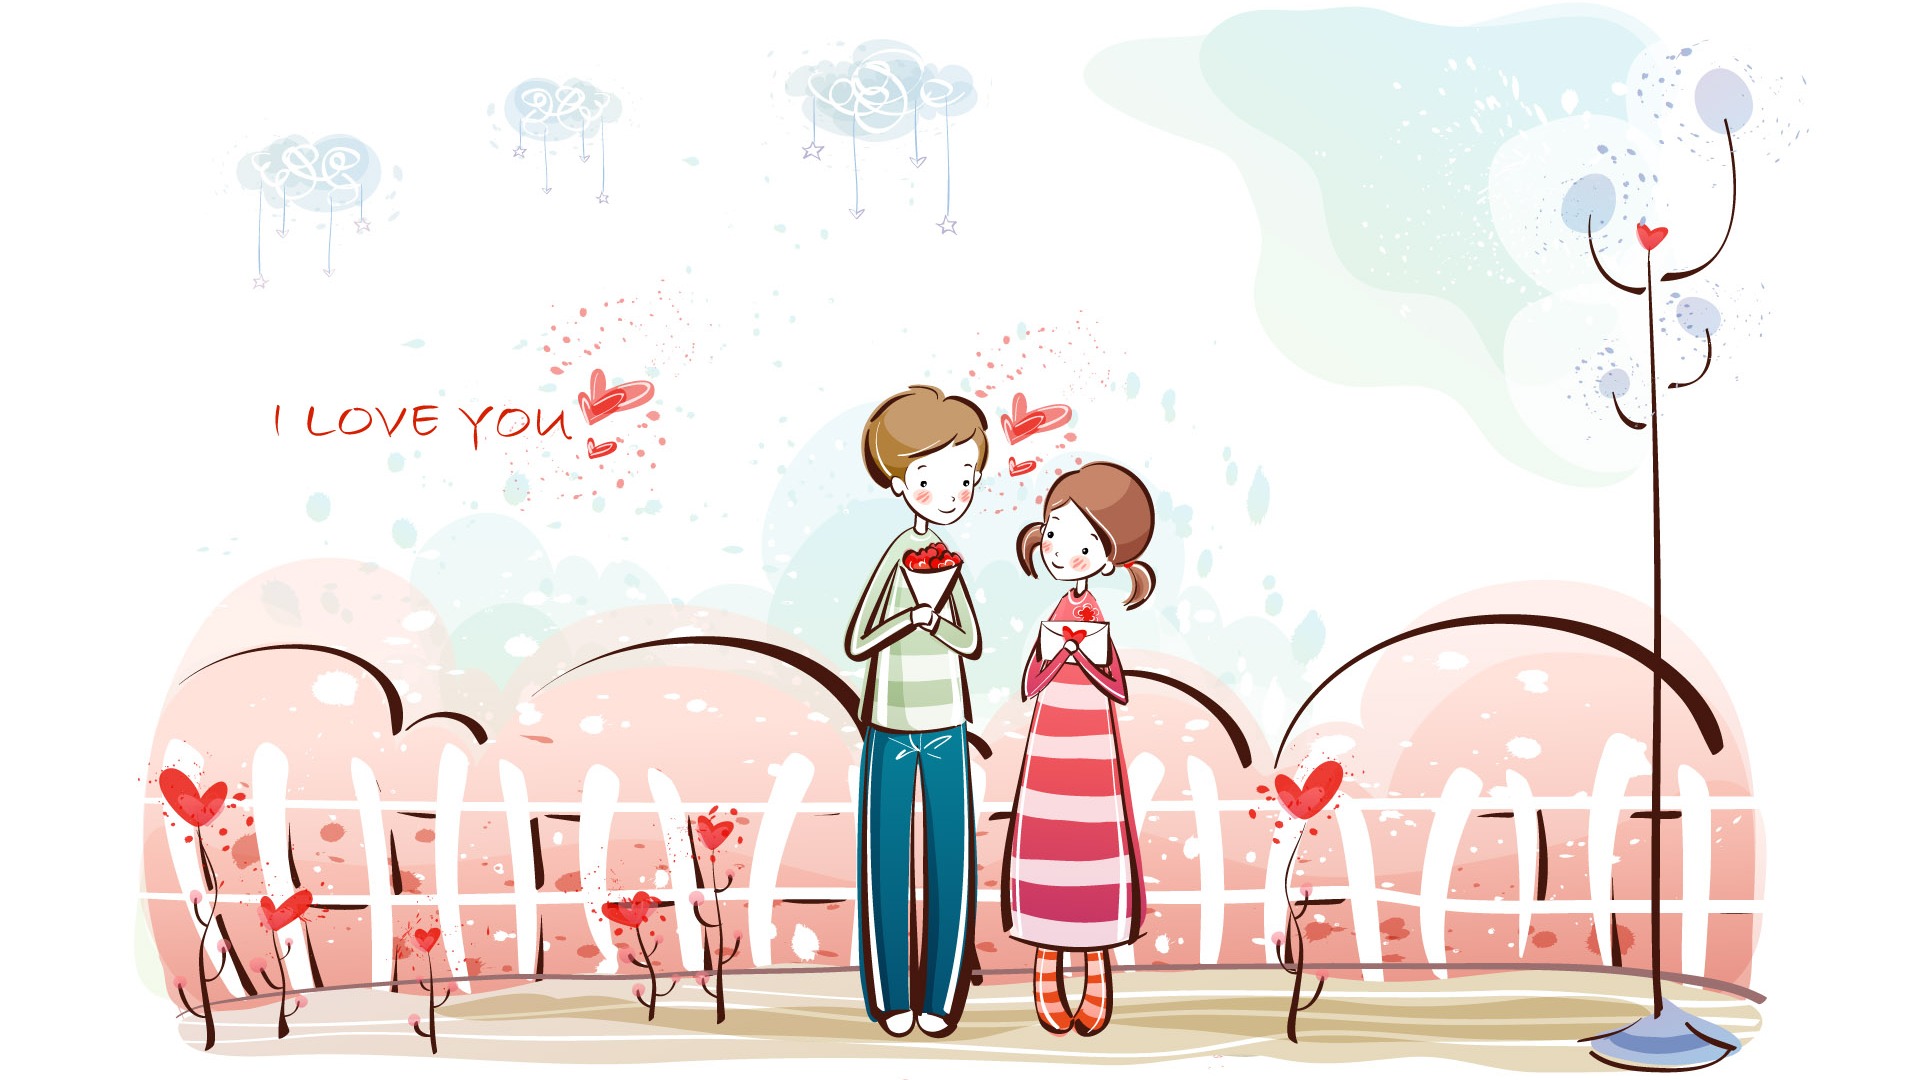 Couples Valentines Day Cartoon - 1920x1080 Wallpaper 